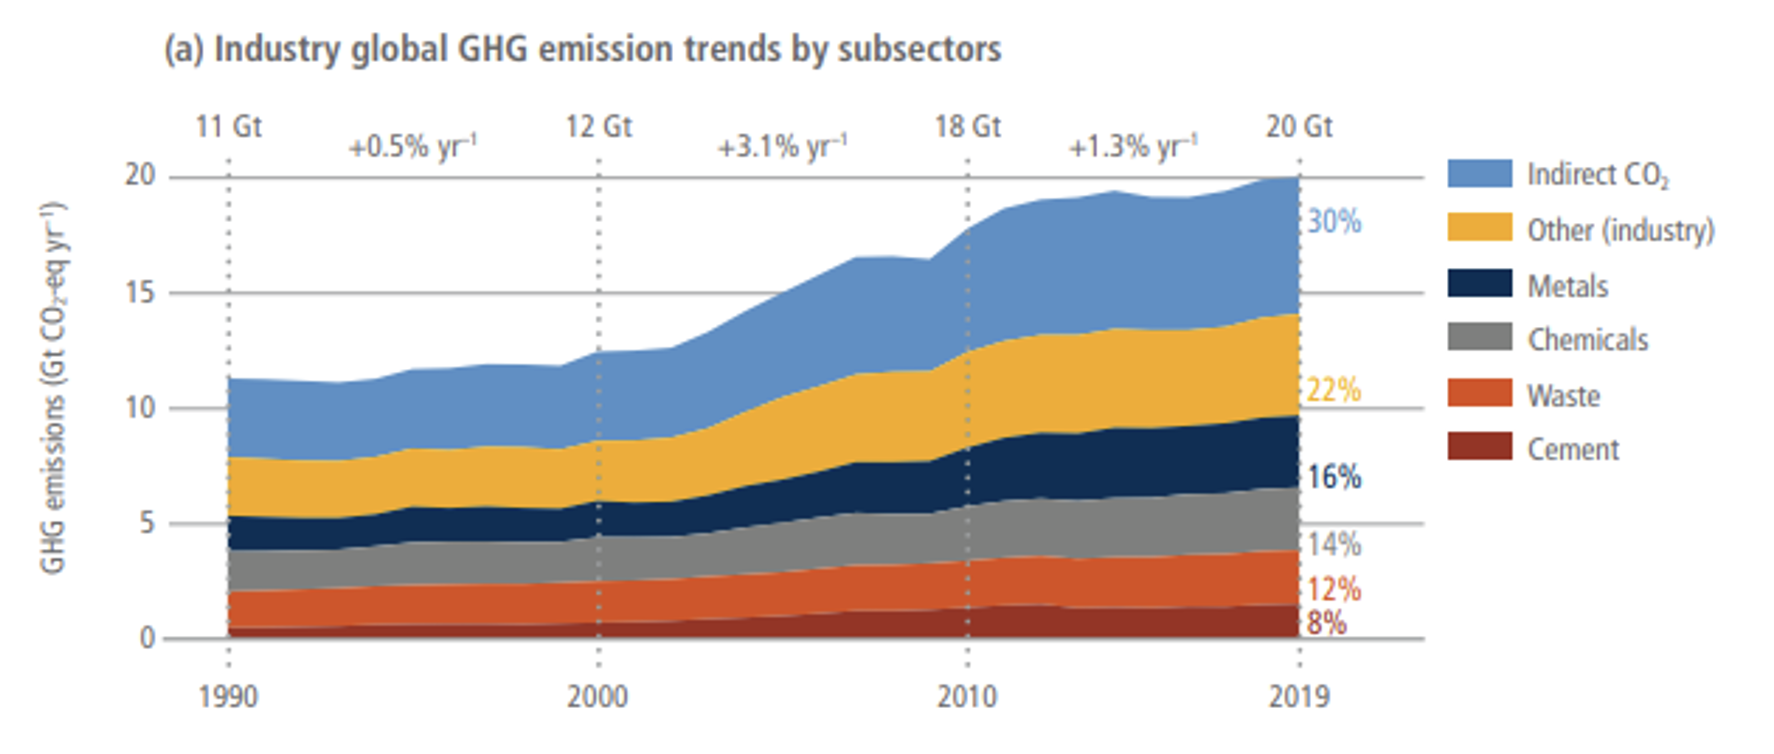 Global GHG emission trends by industry subsectors